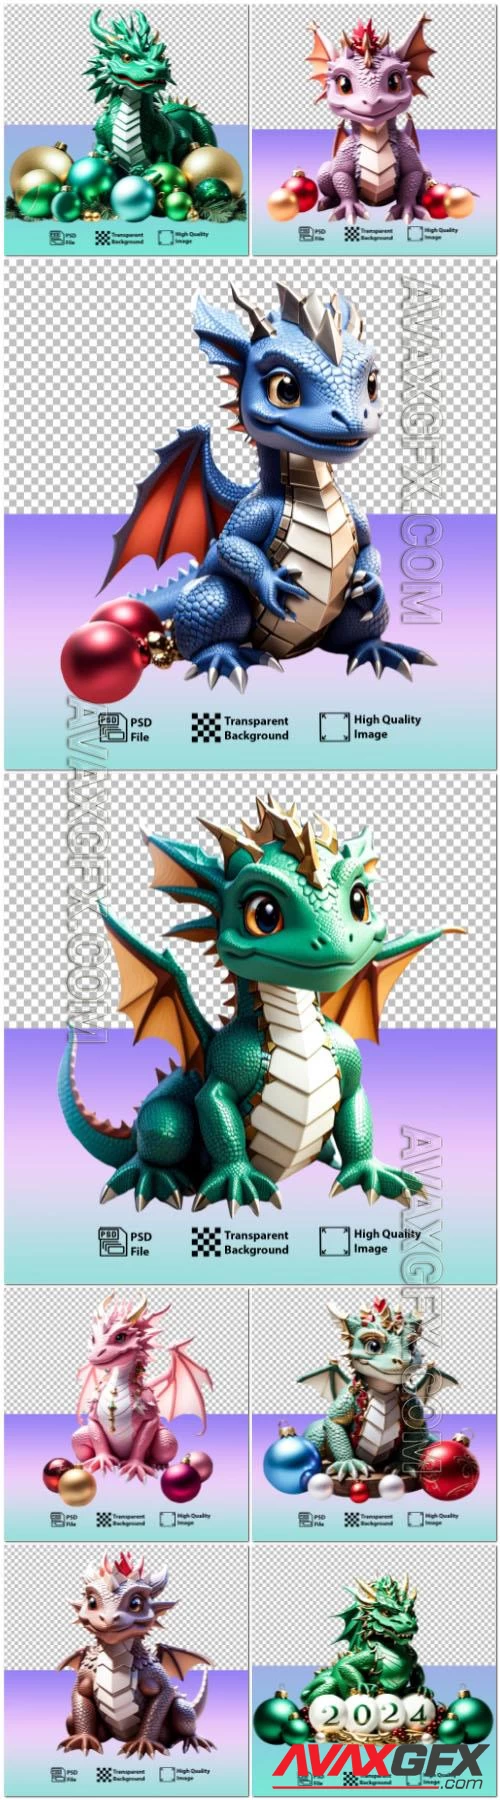 Psd cute stylized dragon with bright shiny scales